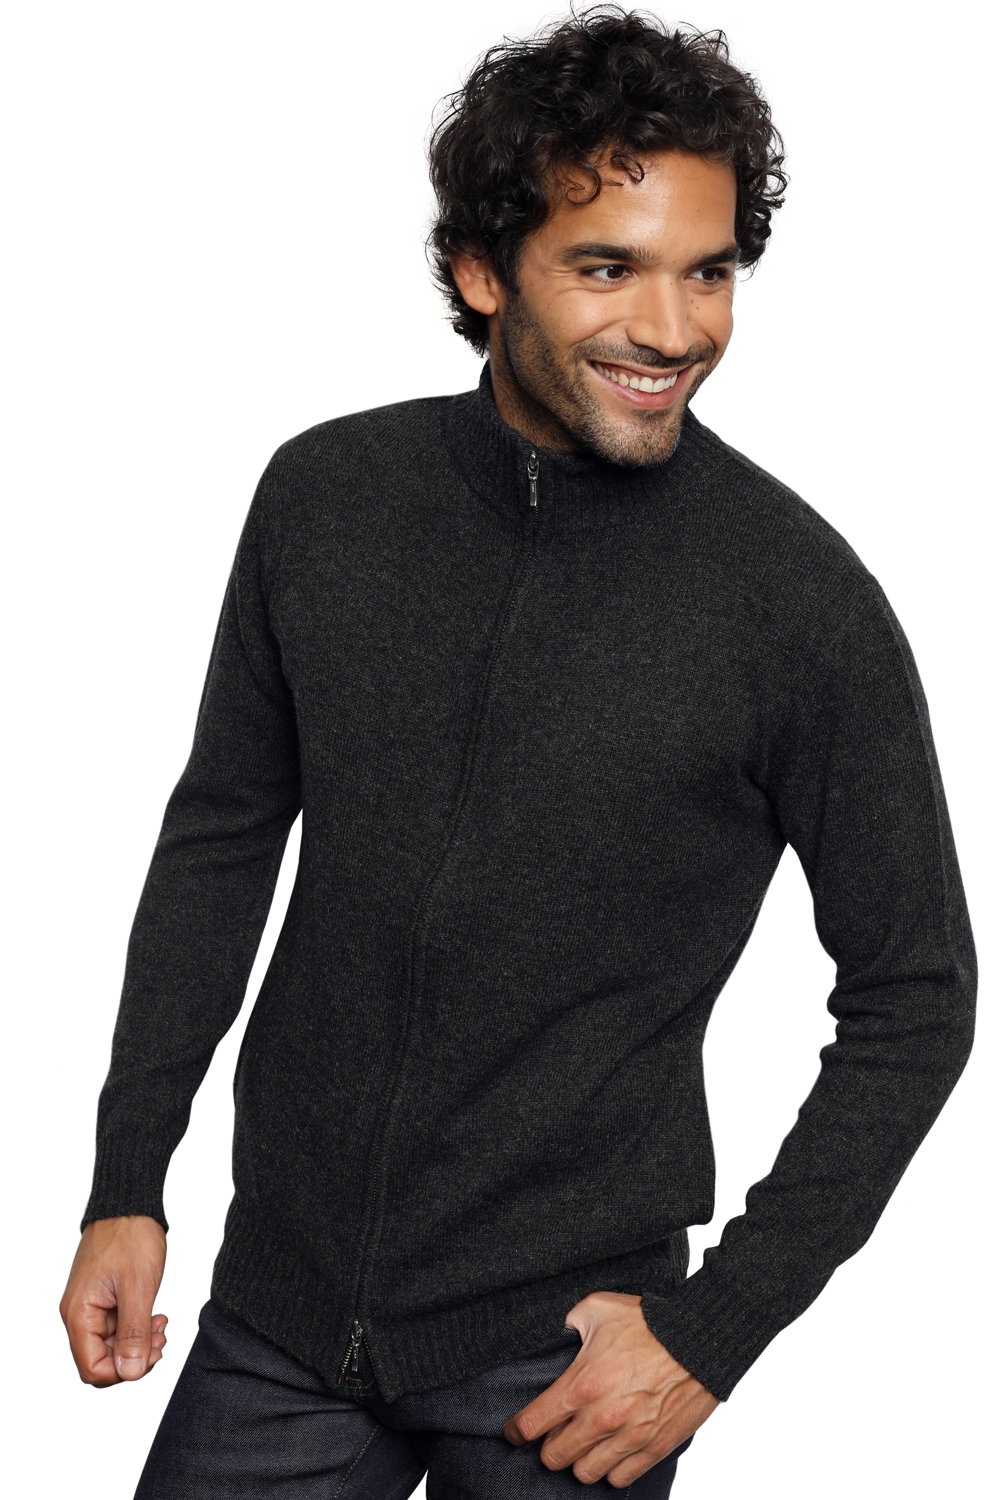 Chameau pull homme zip capuche clyde anthracite m